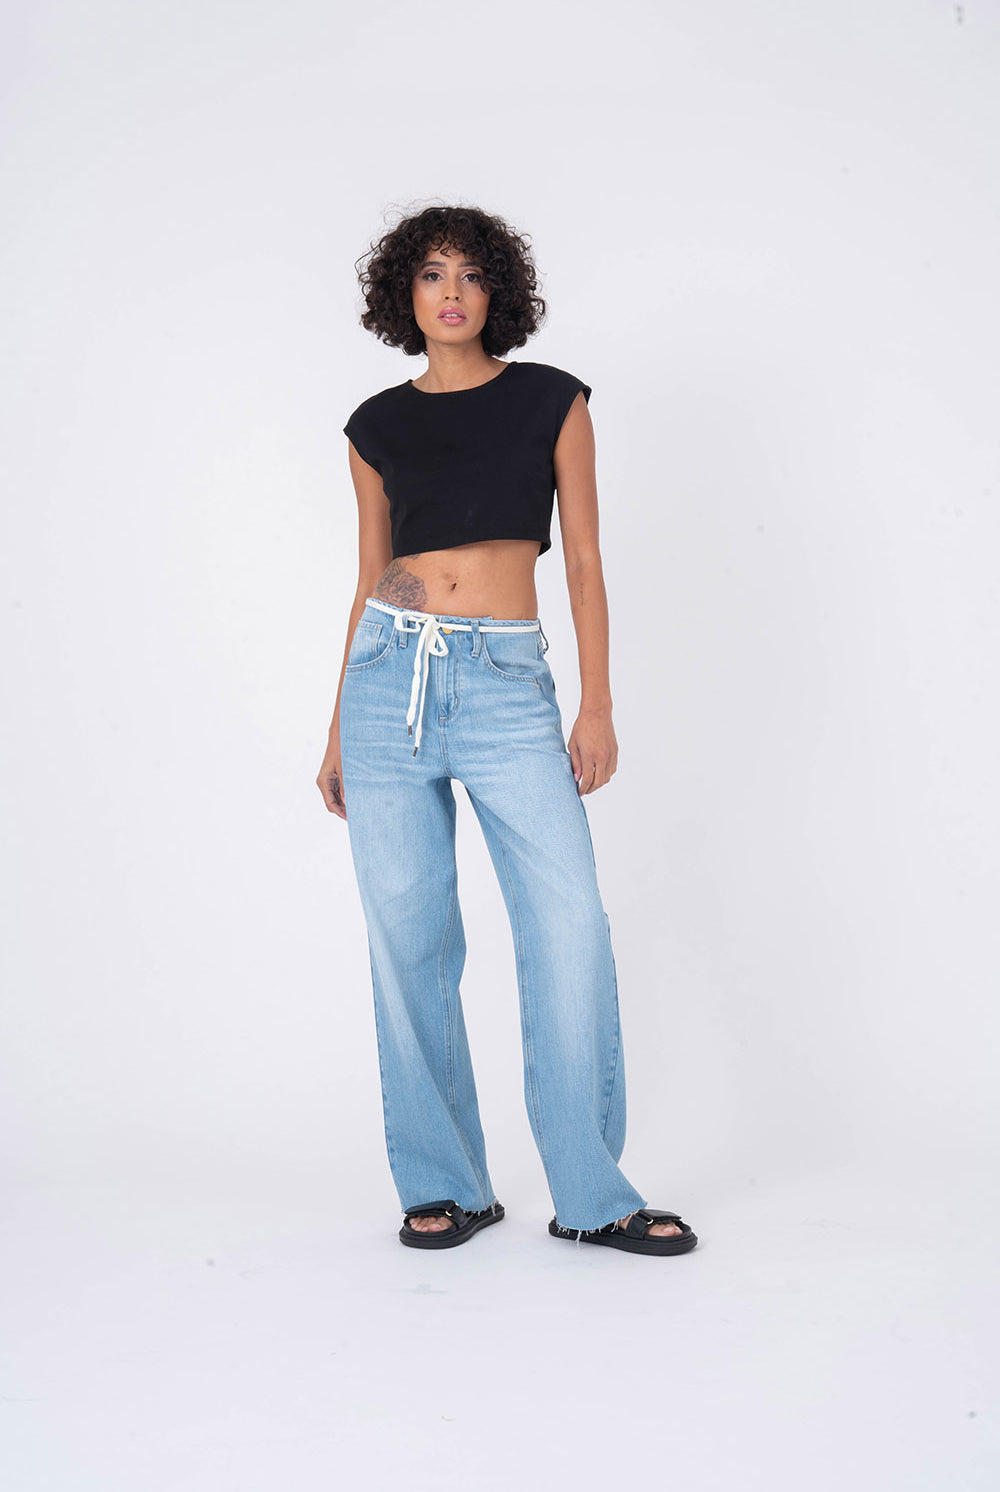 Level99 Sundae Jeans - Daze-Denim-Vixen Collection, Day Spa and Women's Boutique Located in Seattle, Washington